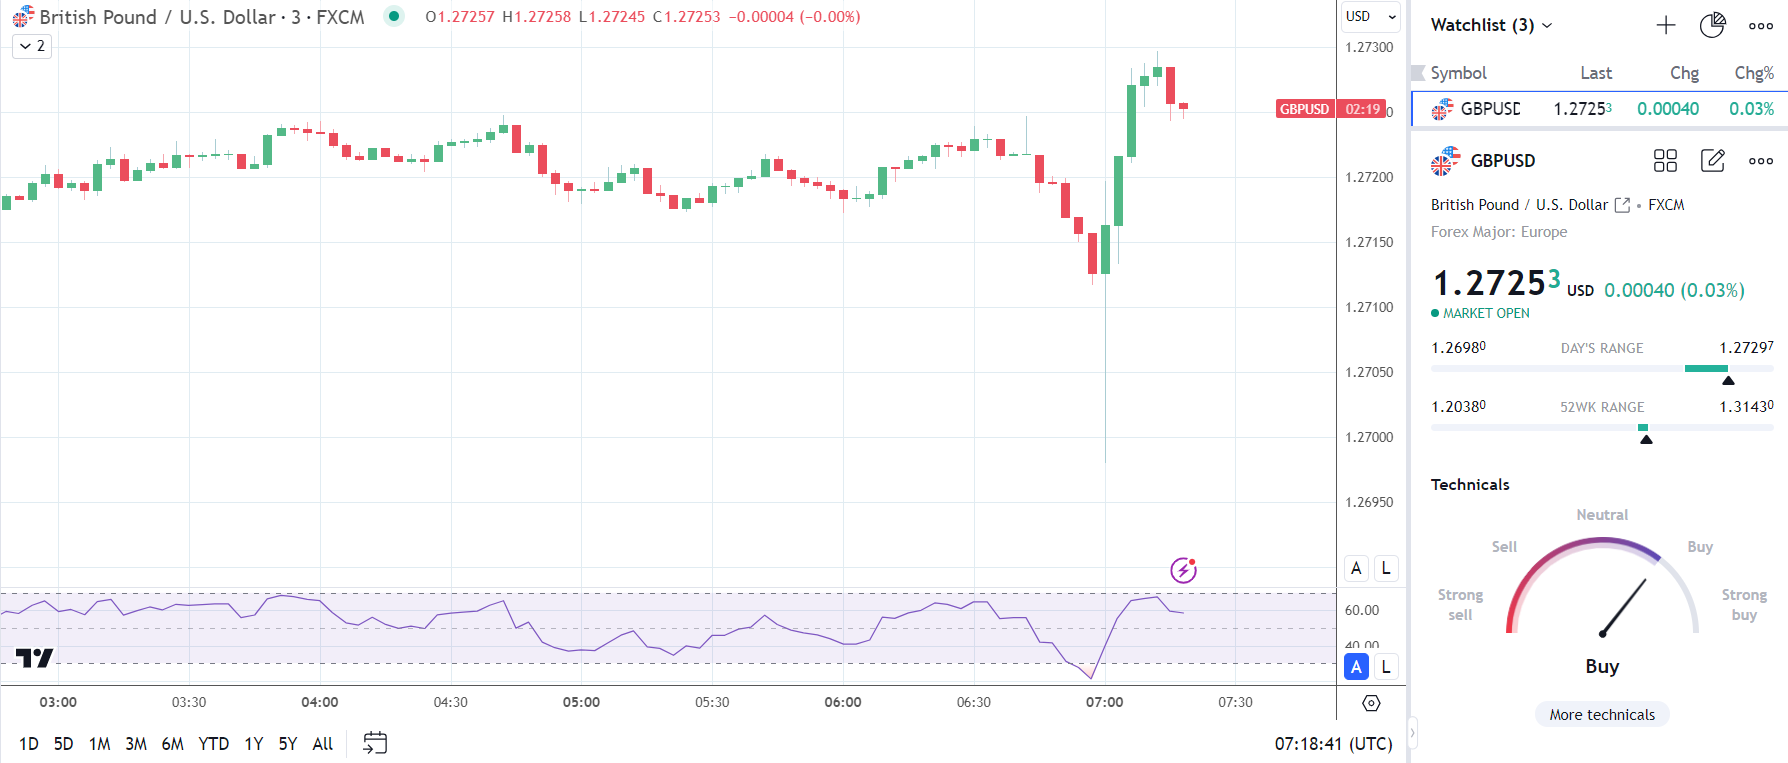 GBP/USD reacts to UK inflation report.